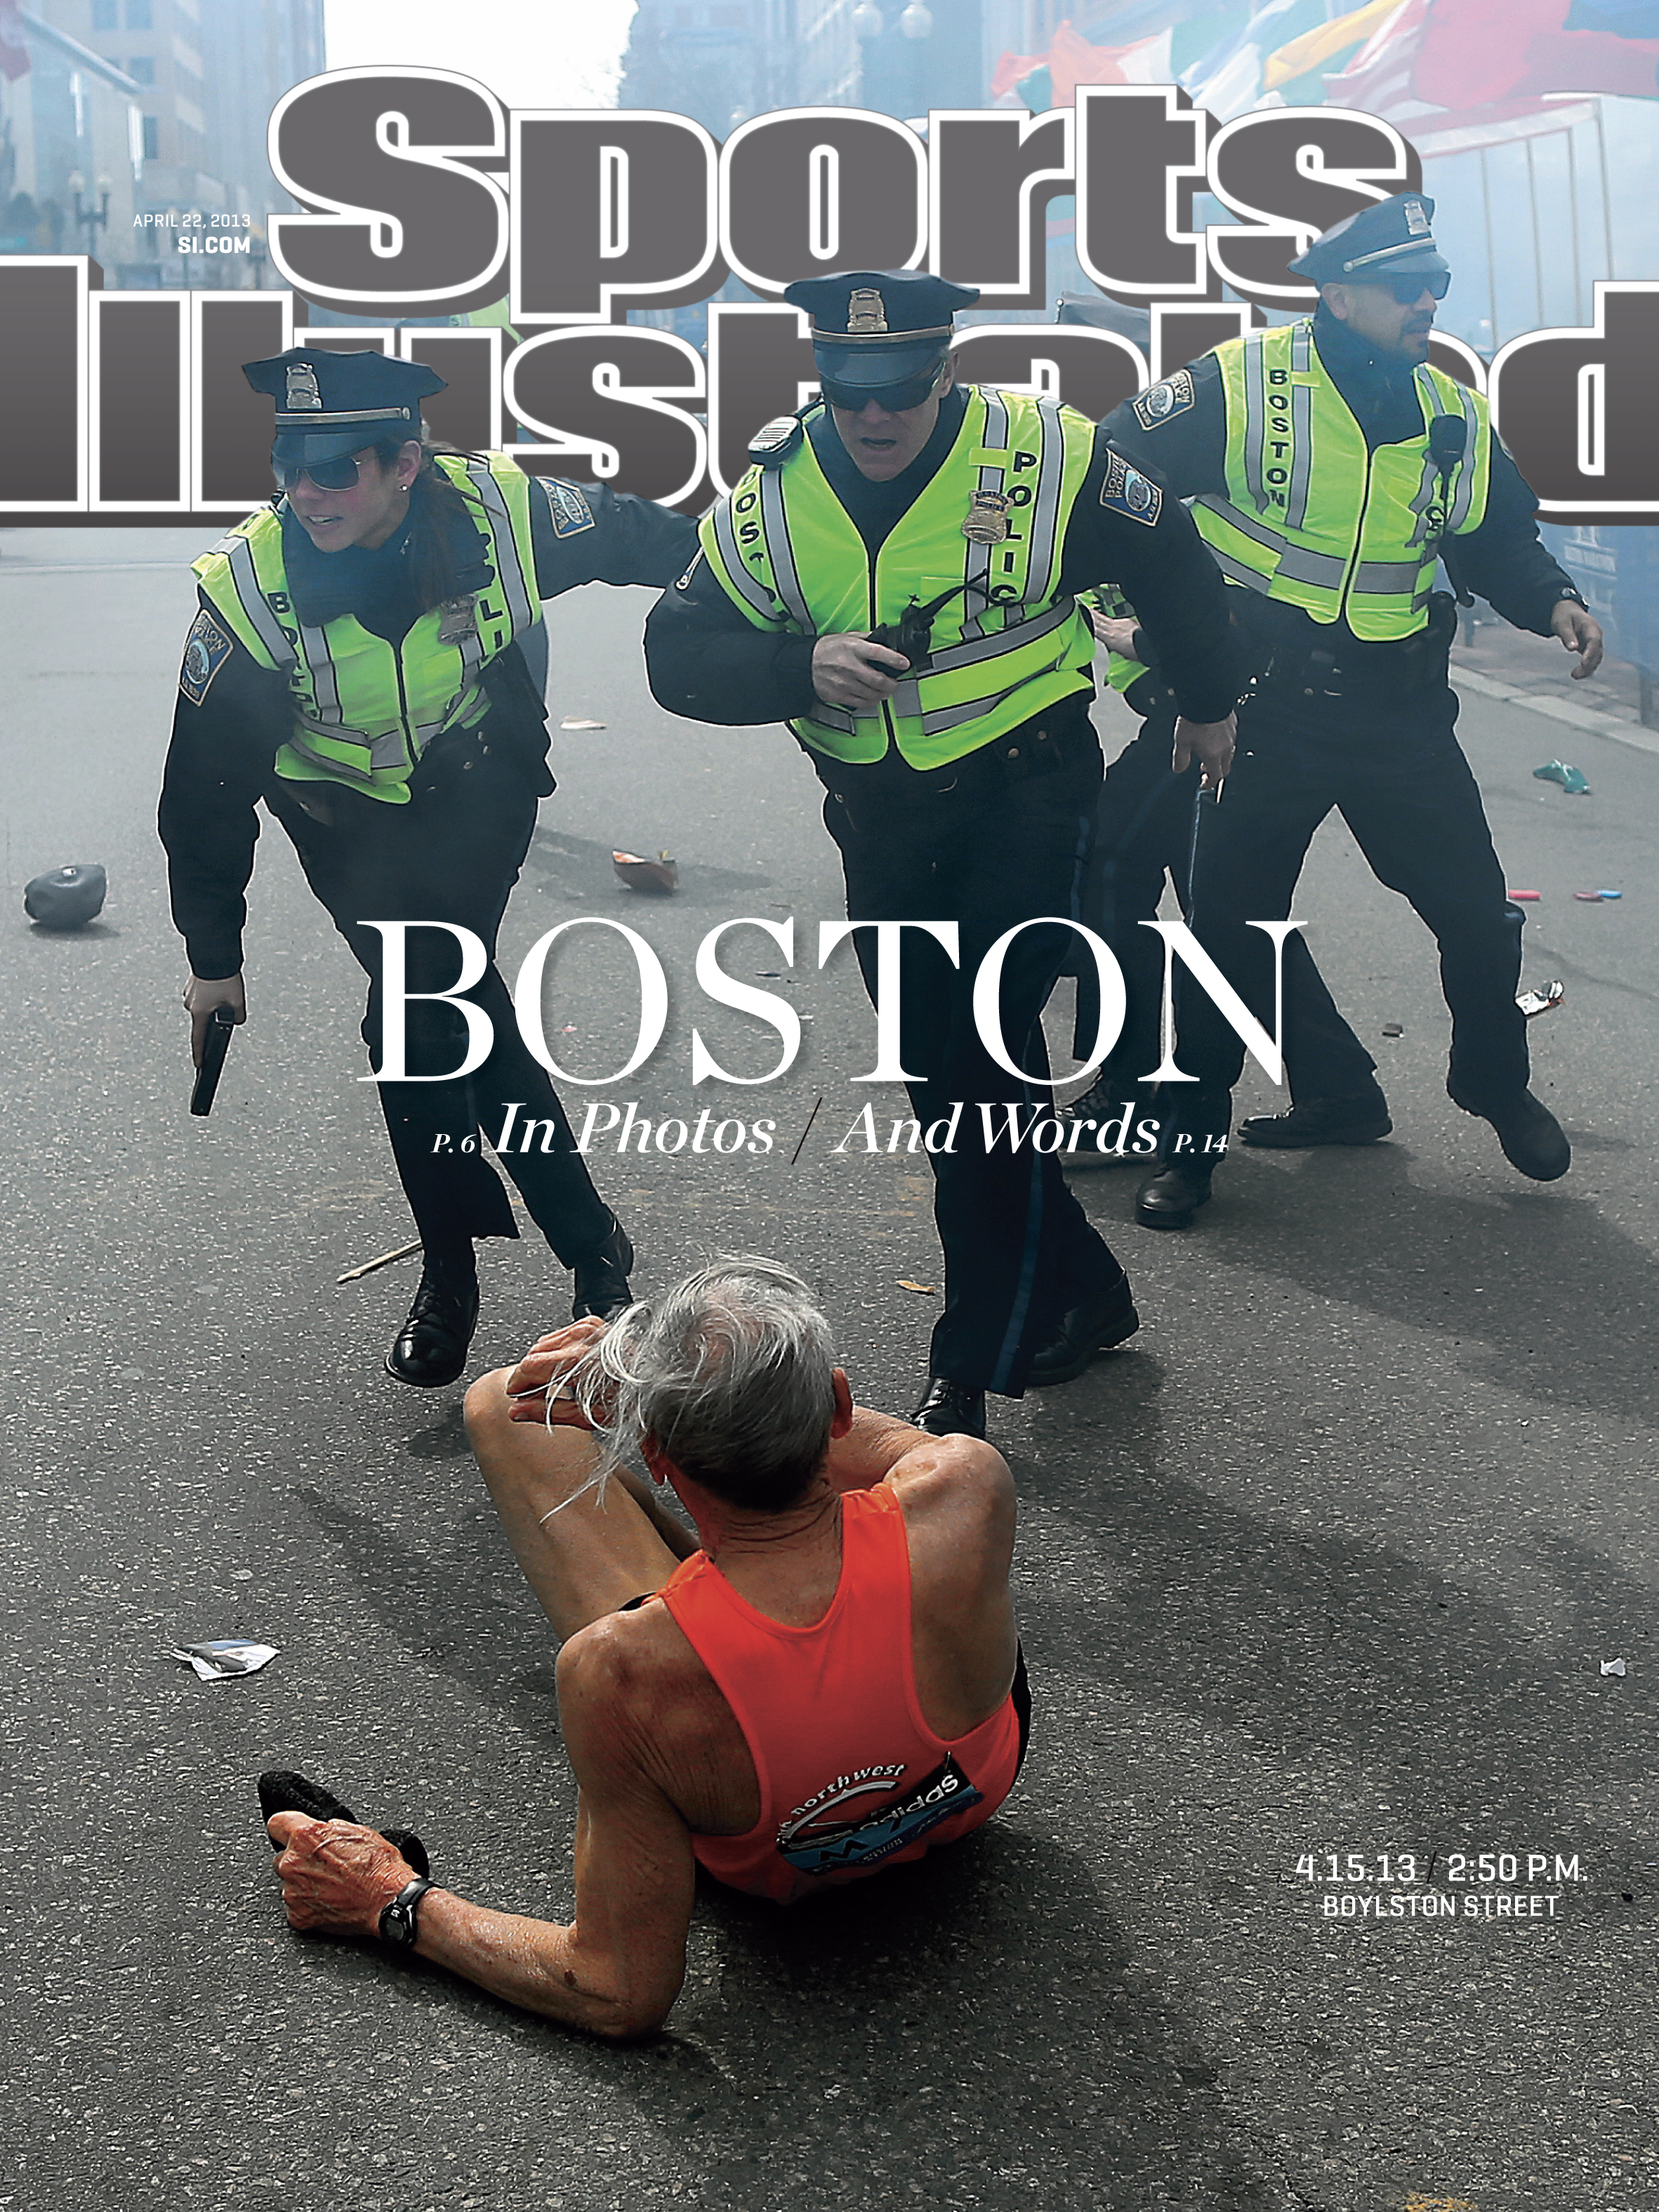 Sports Illustrated's cover for the April 22, 2013 issue